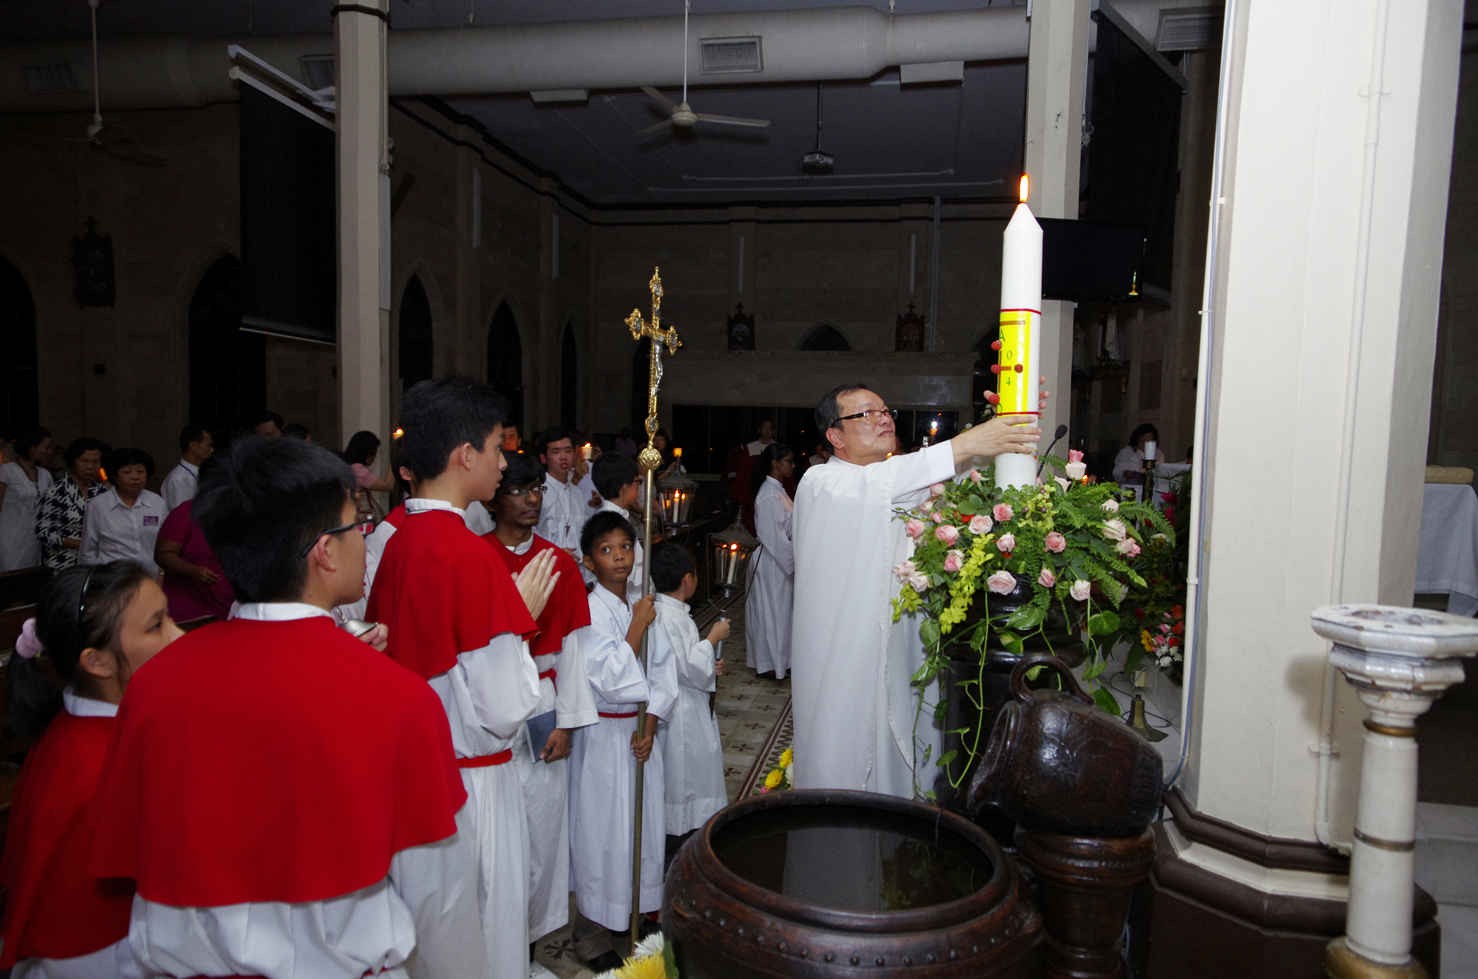 Fr Liew and Easter candle